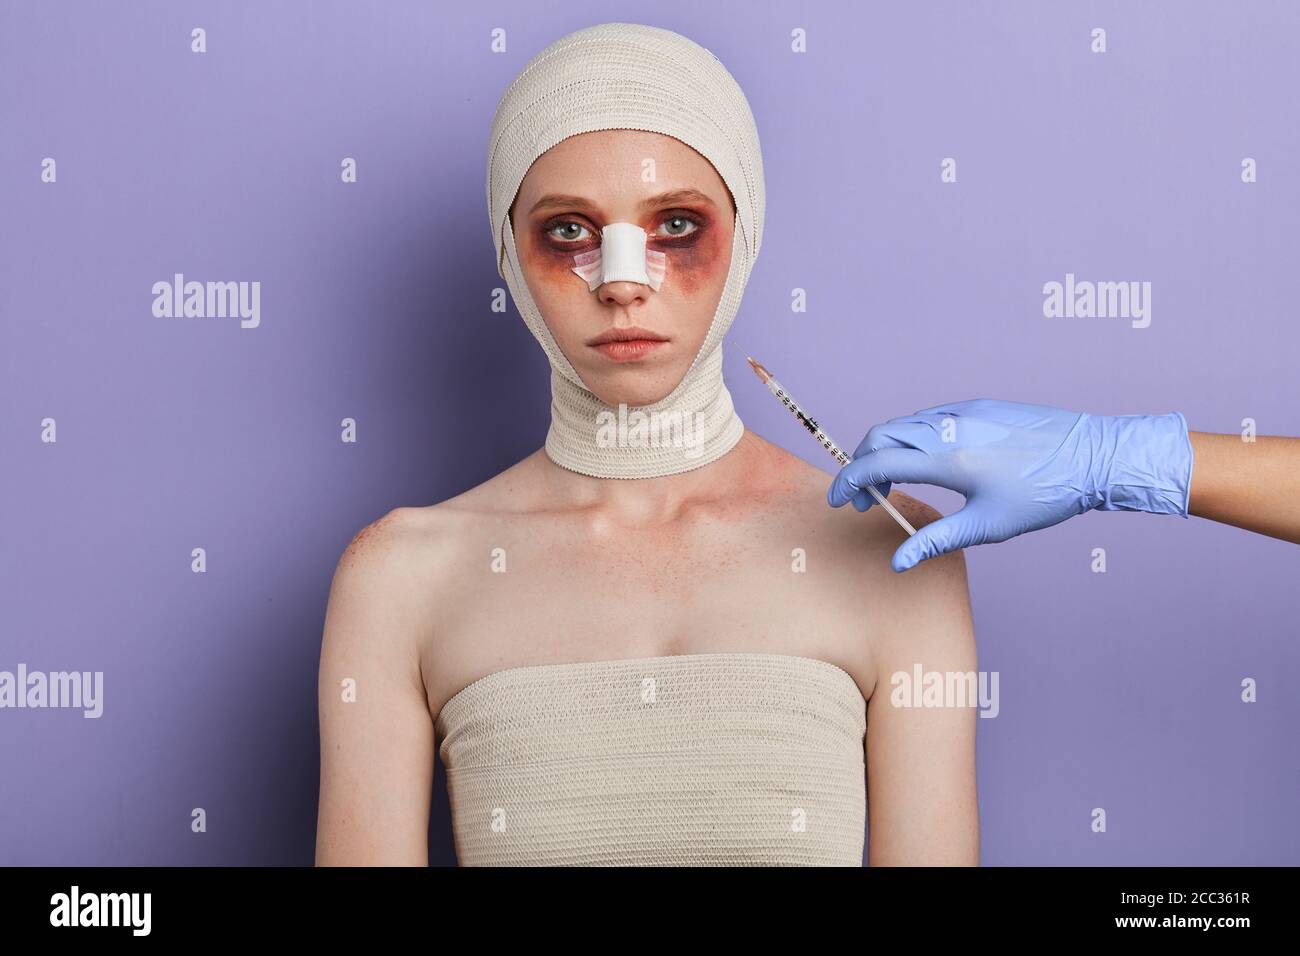 young woman with bruises does injection to nasolabial fold, close up portrait, isolated blue background, studio shot.lifestyle, treatment Stock Photo